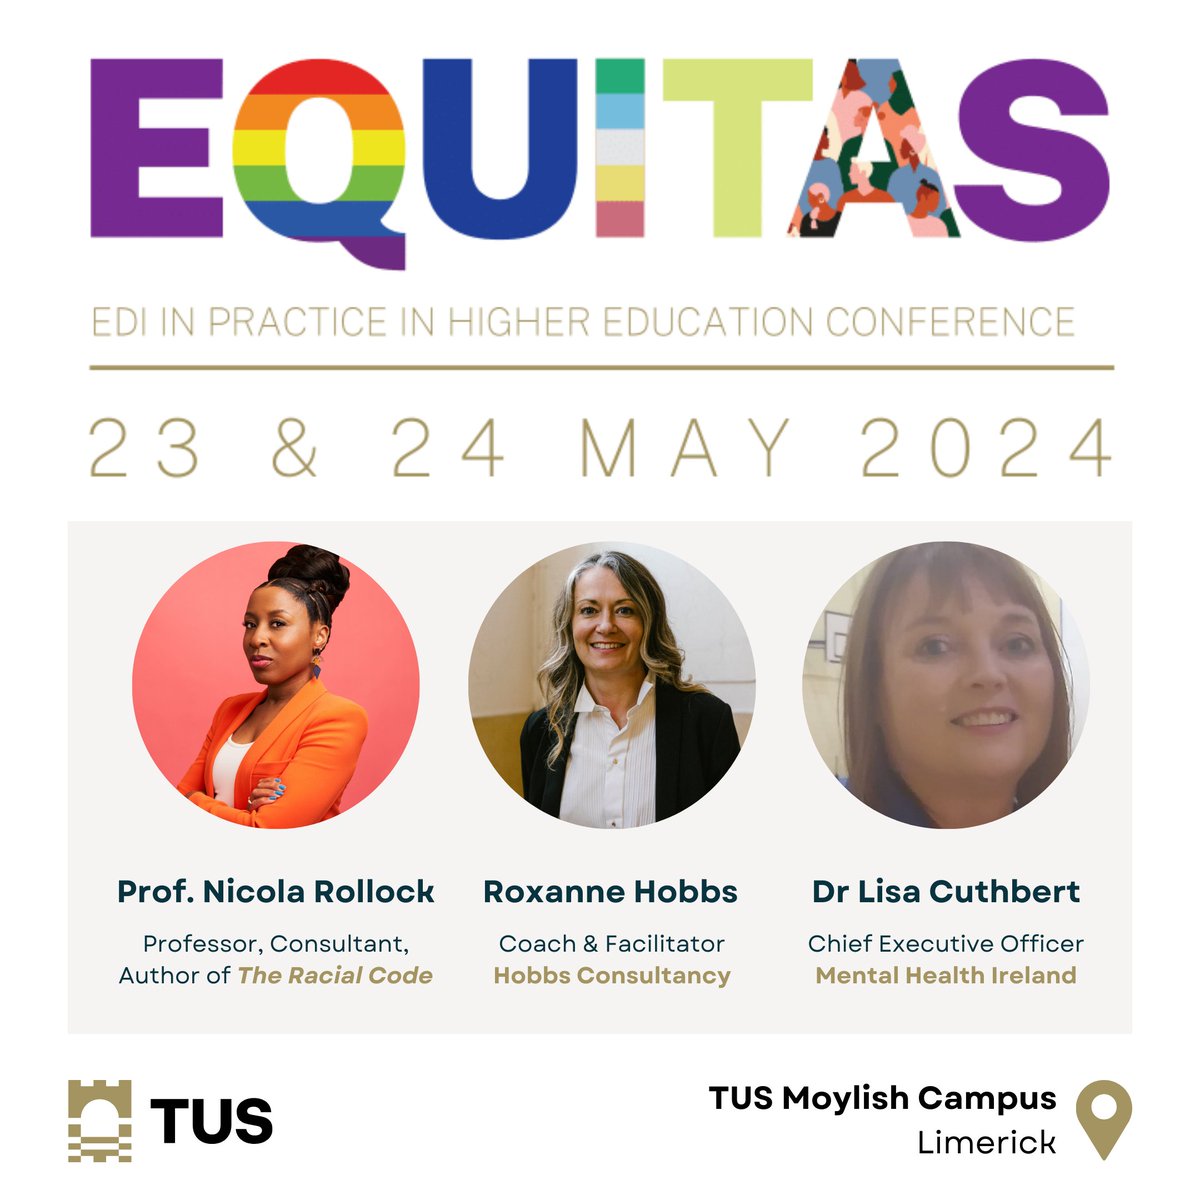 The Equitas EDI in Practice in Higher Education conference will be held in @TUS_ie Moylish on the 23rd/24th May. The conference is open to all who are interested in EDI in Higher Education. Places are going fast. Book now or learn more here: tus.ie/edi/practice-i…